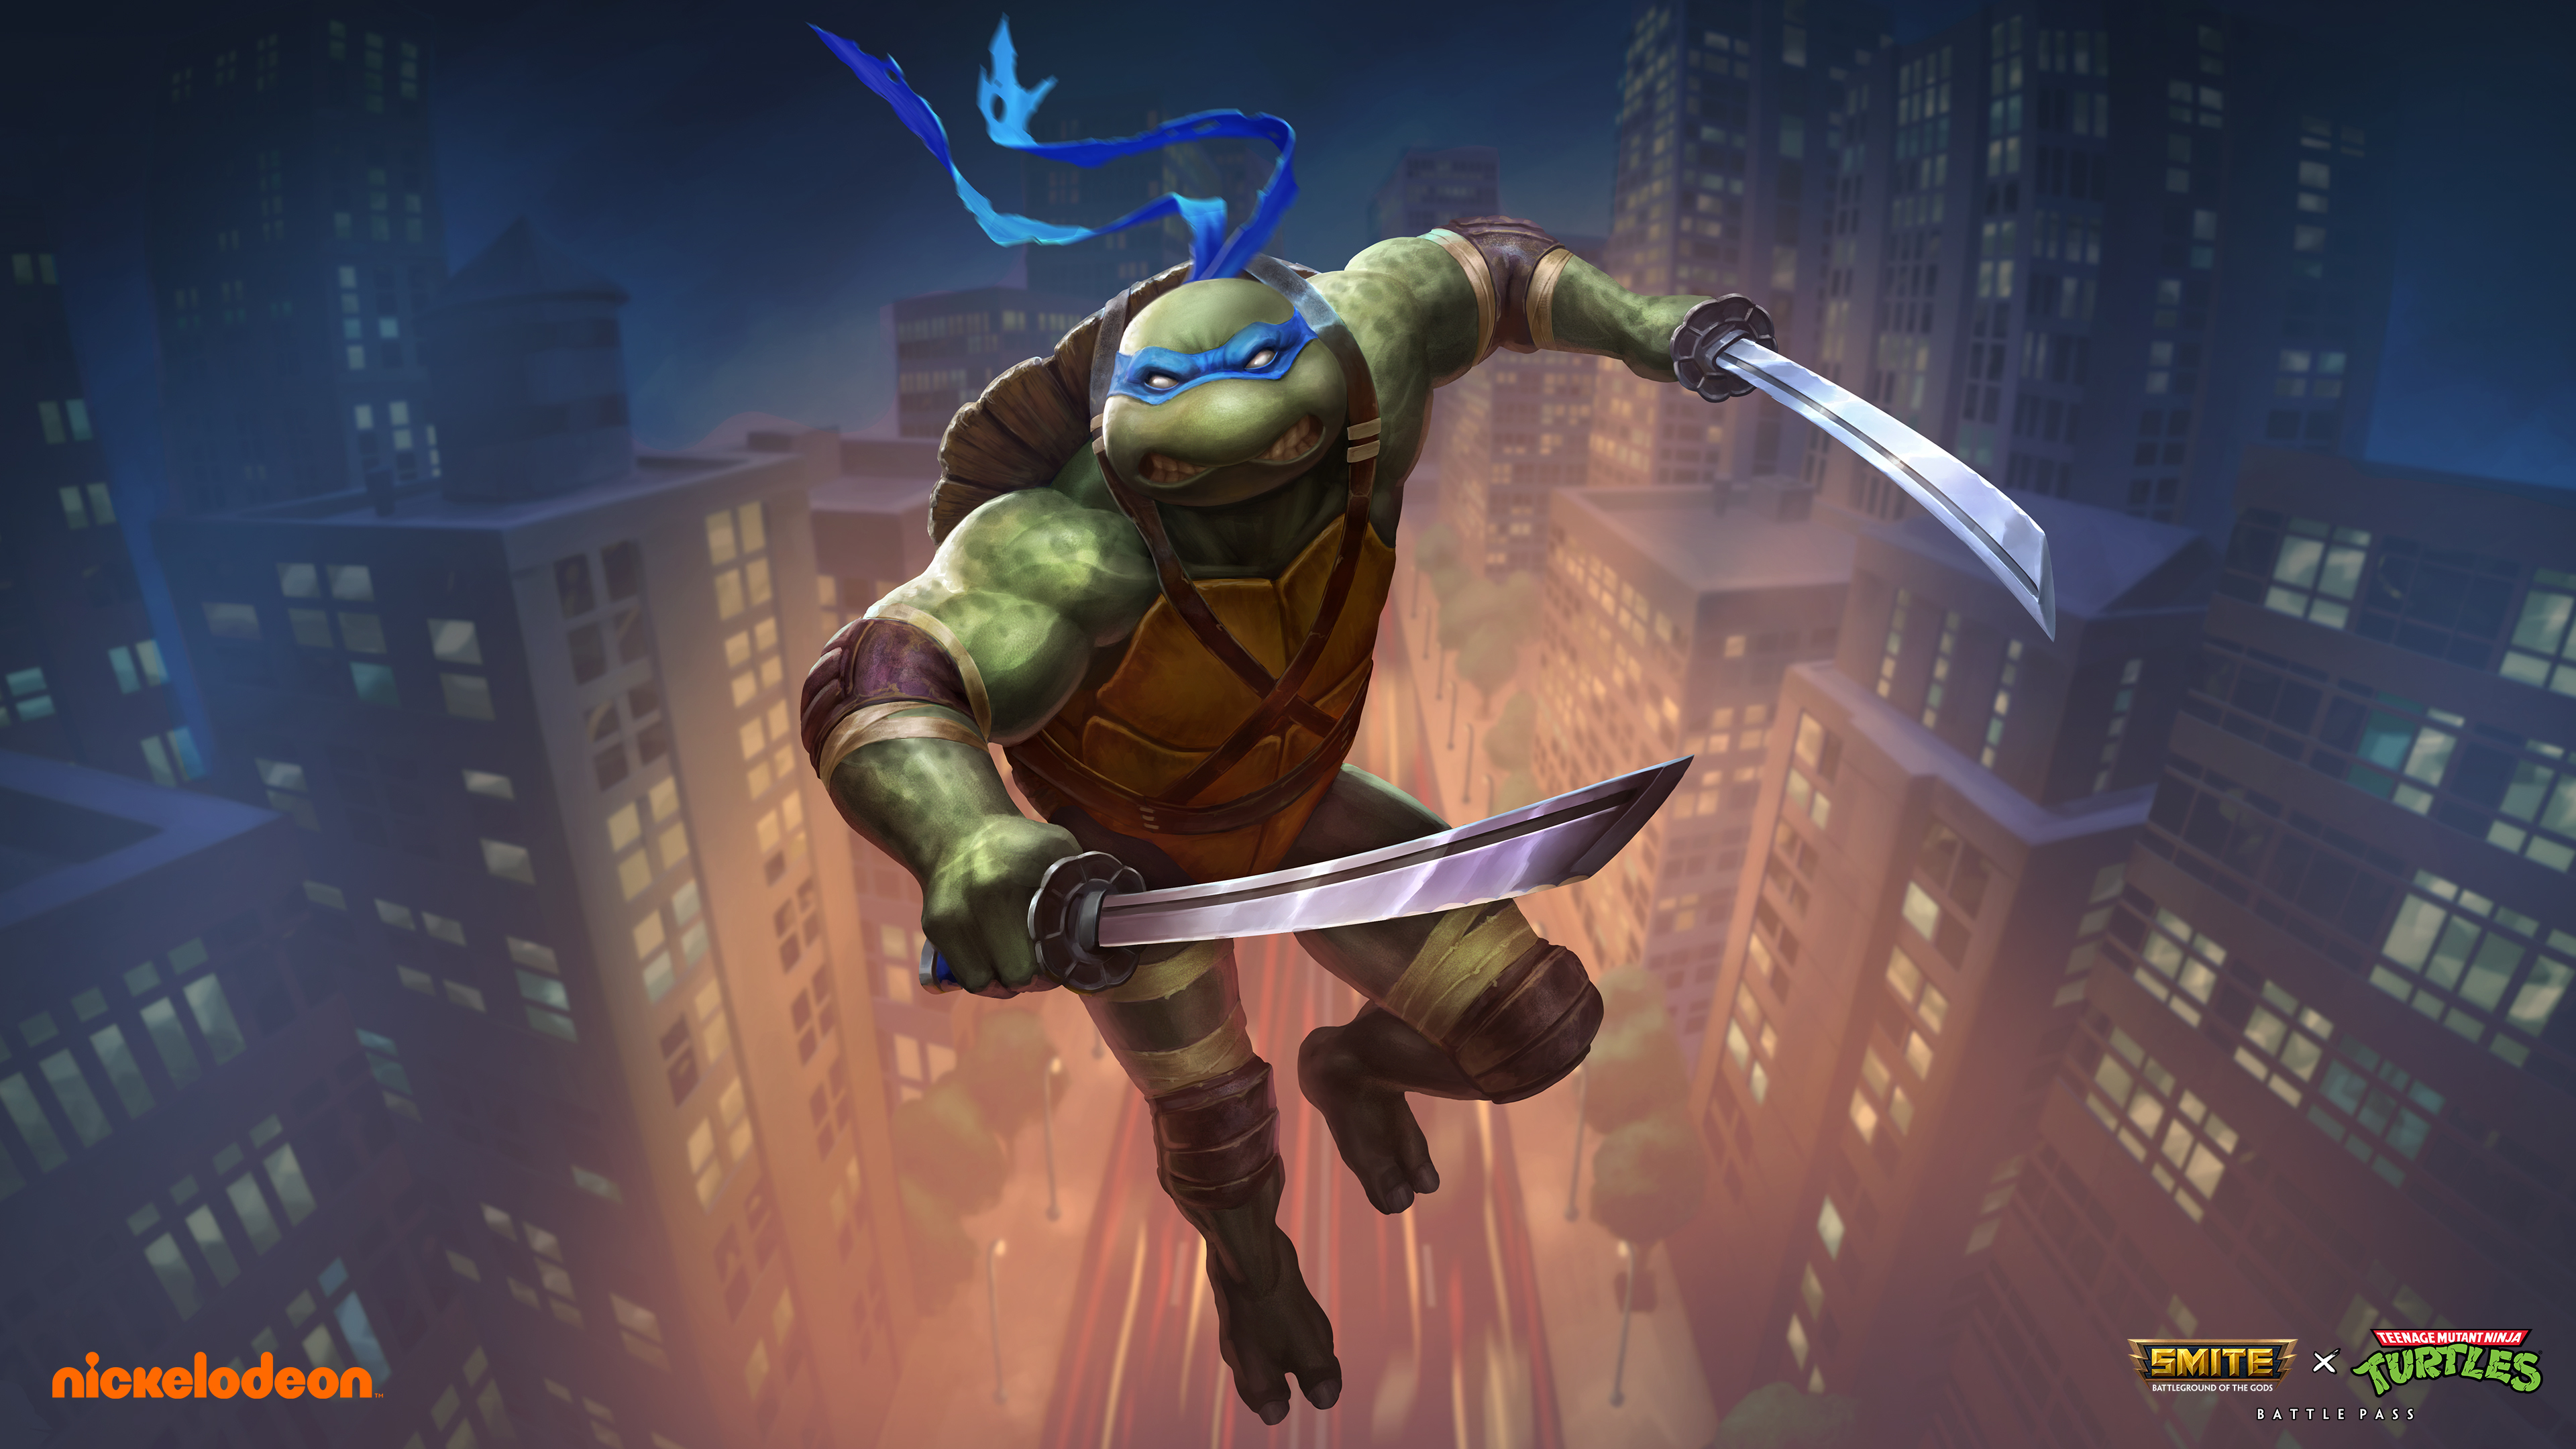 3840x2160 80+ Leonardo (TMNT) HD Wallpapers and Backgrounds